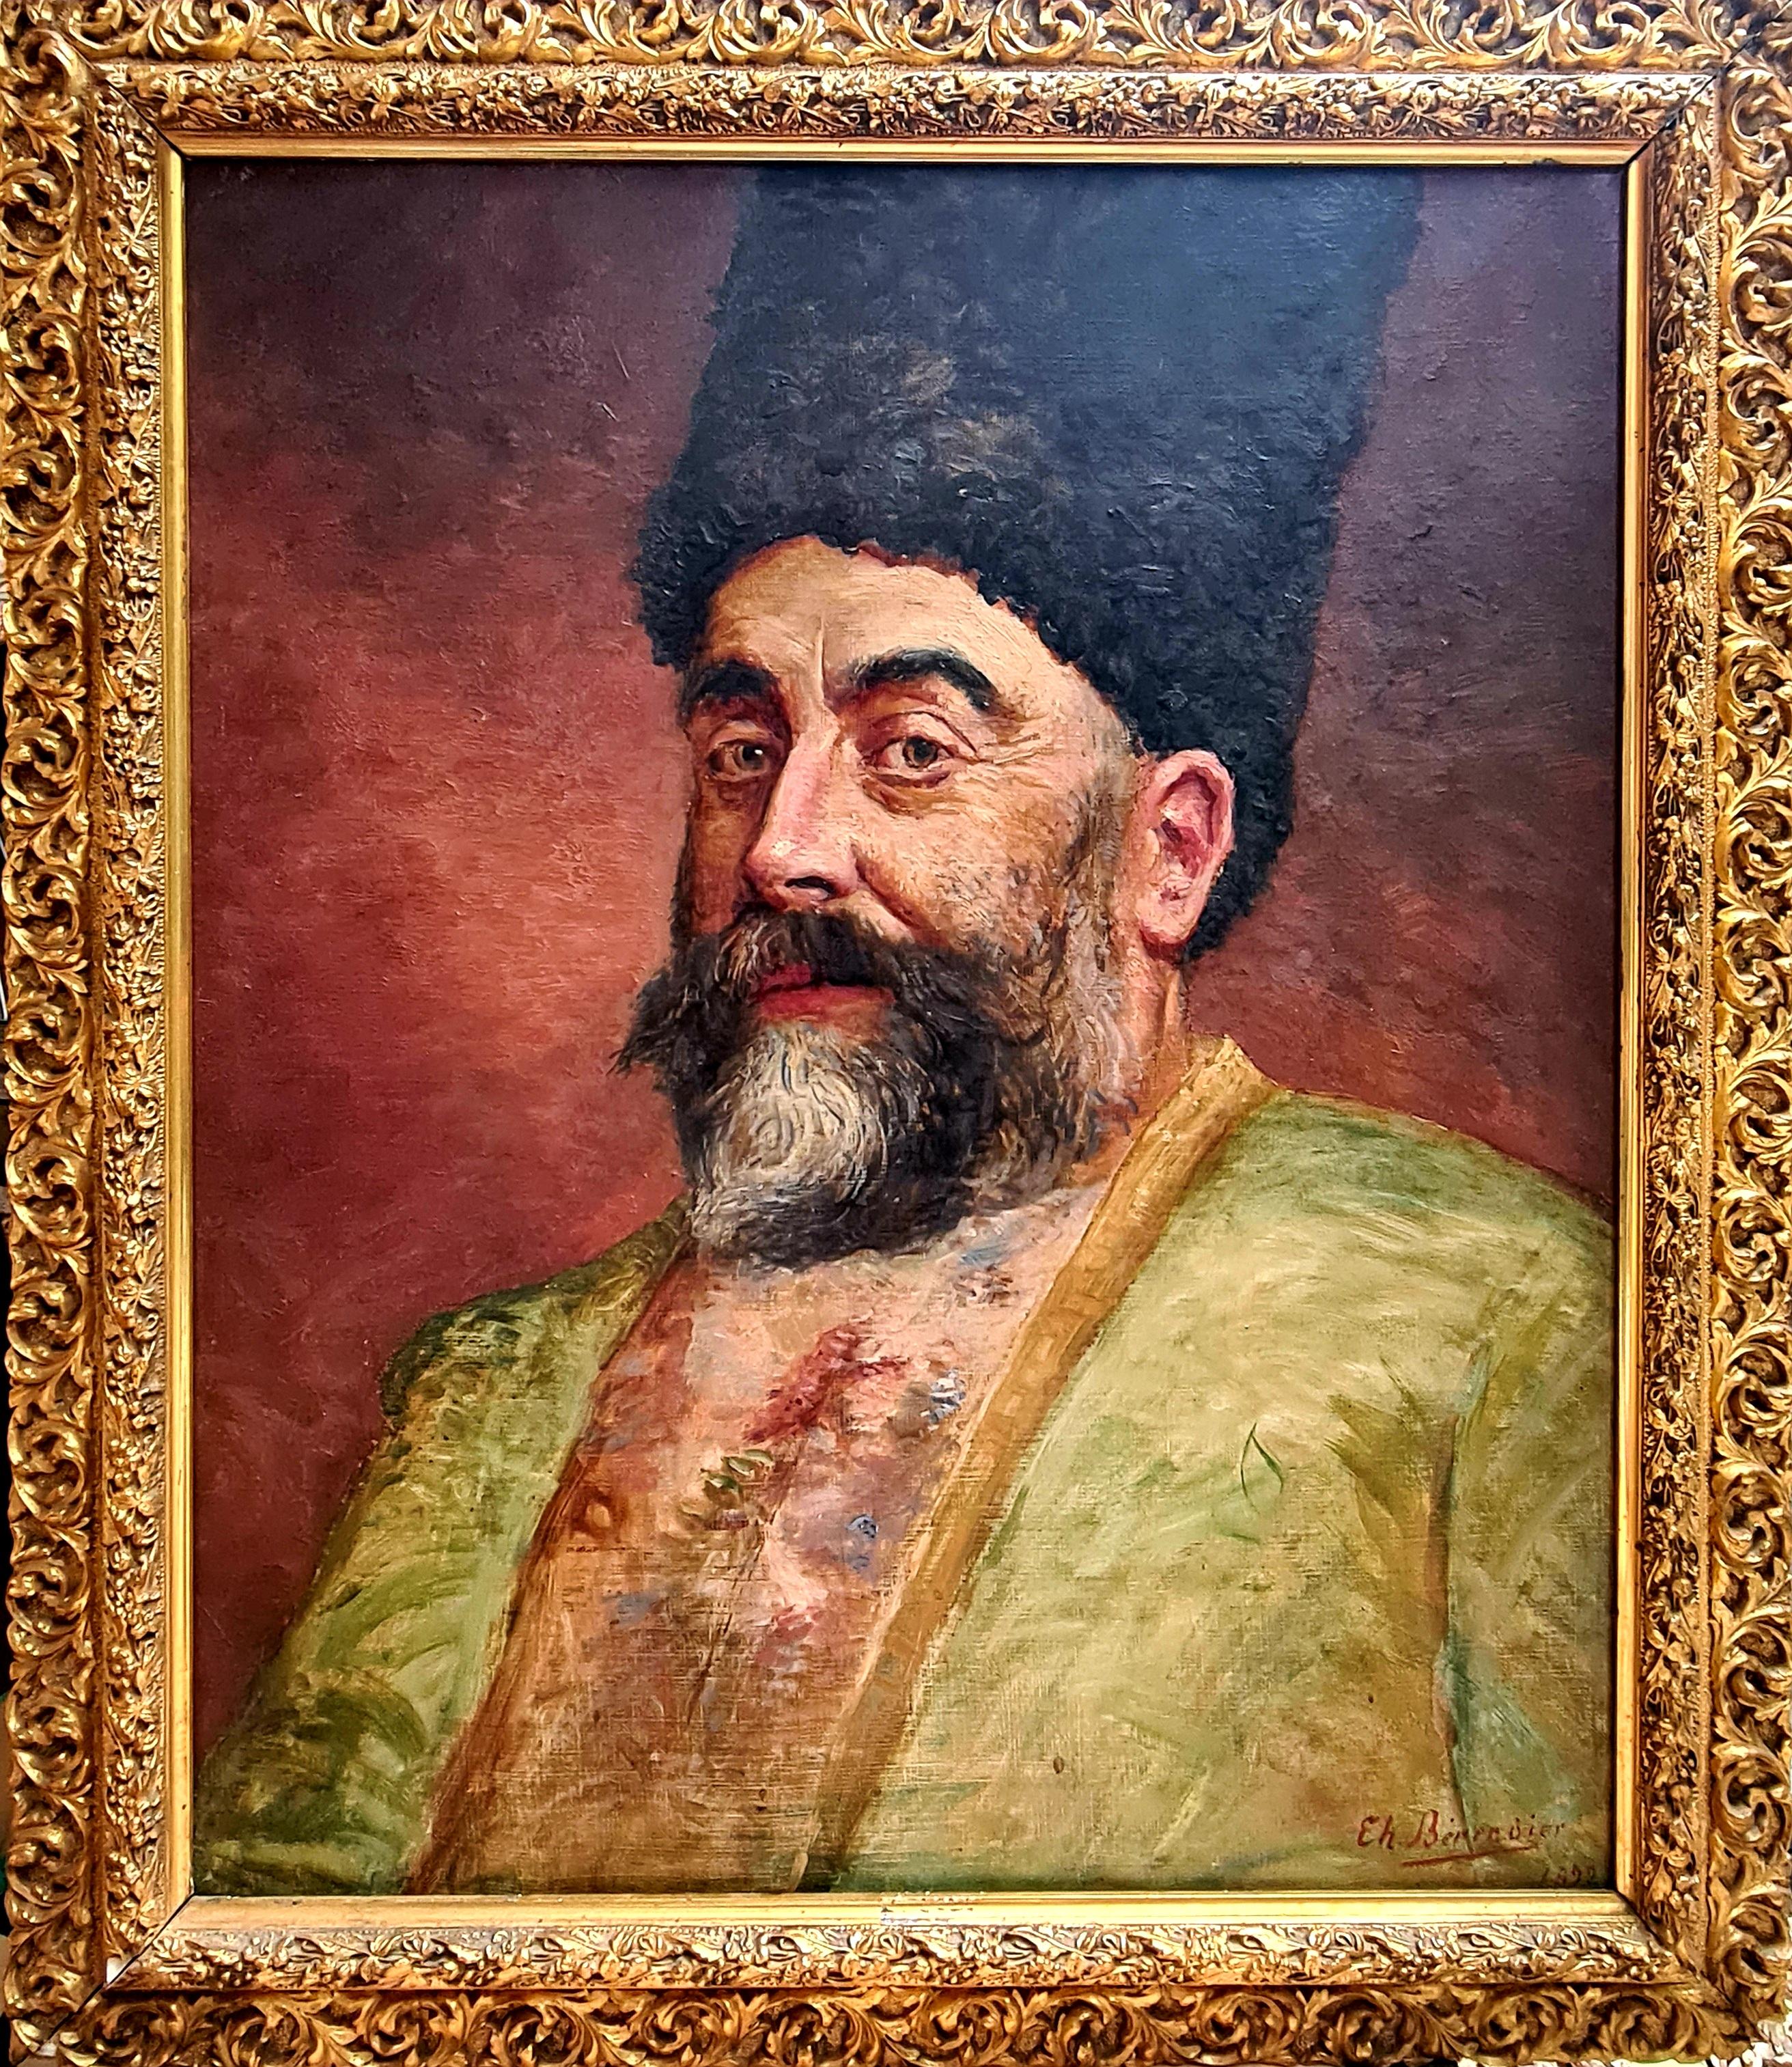 Théophile Bérengier Figurative Painting - The Papakha, A Pre Revolutionary Nobleman From the Caucasus.